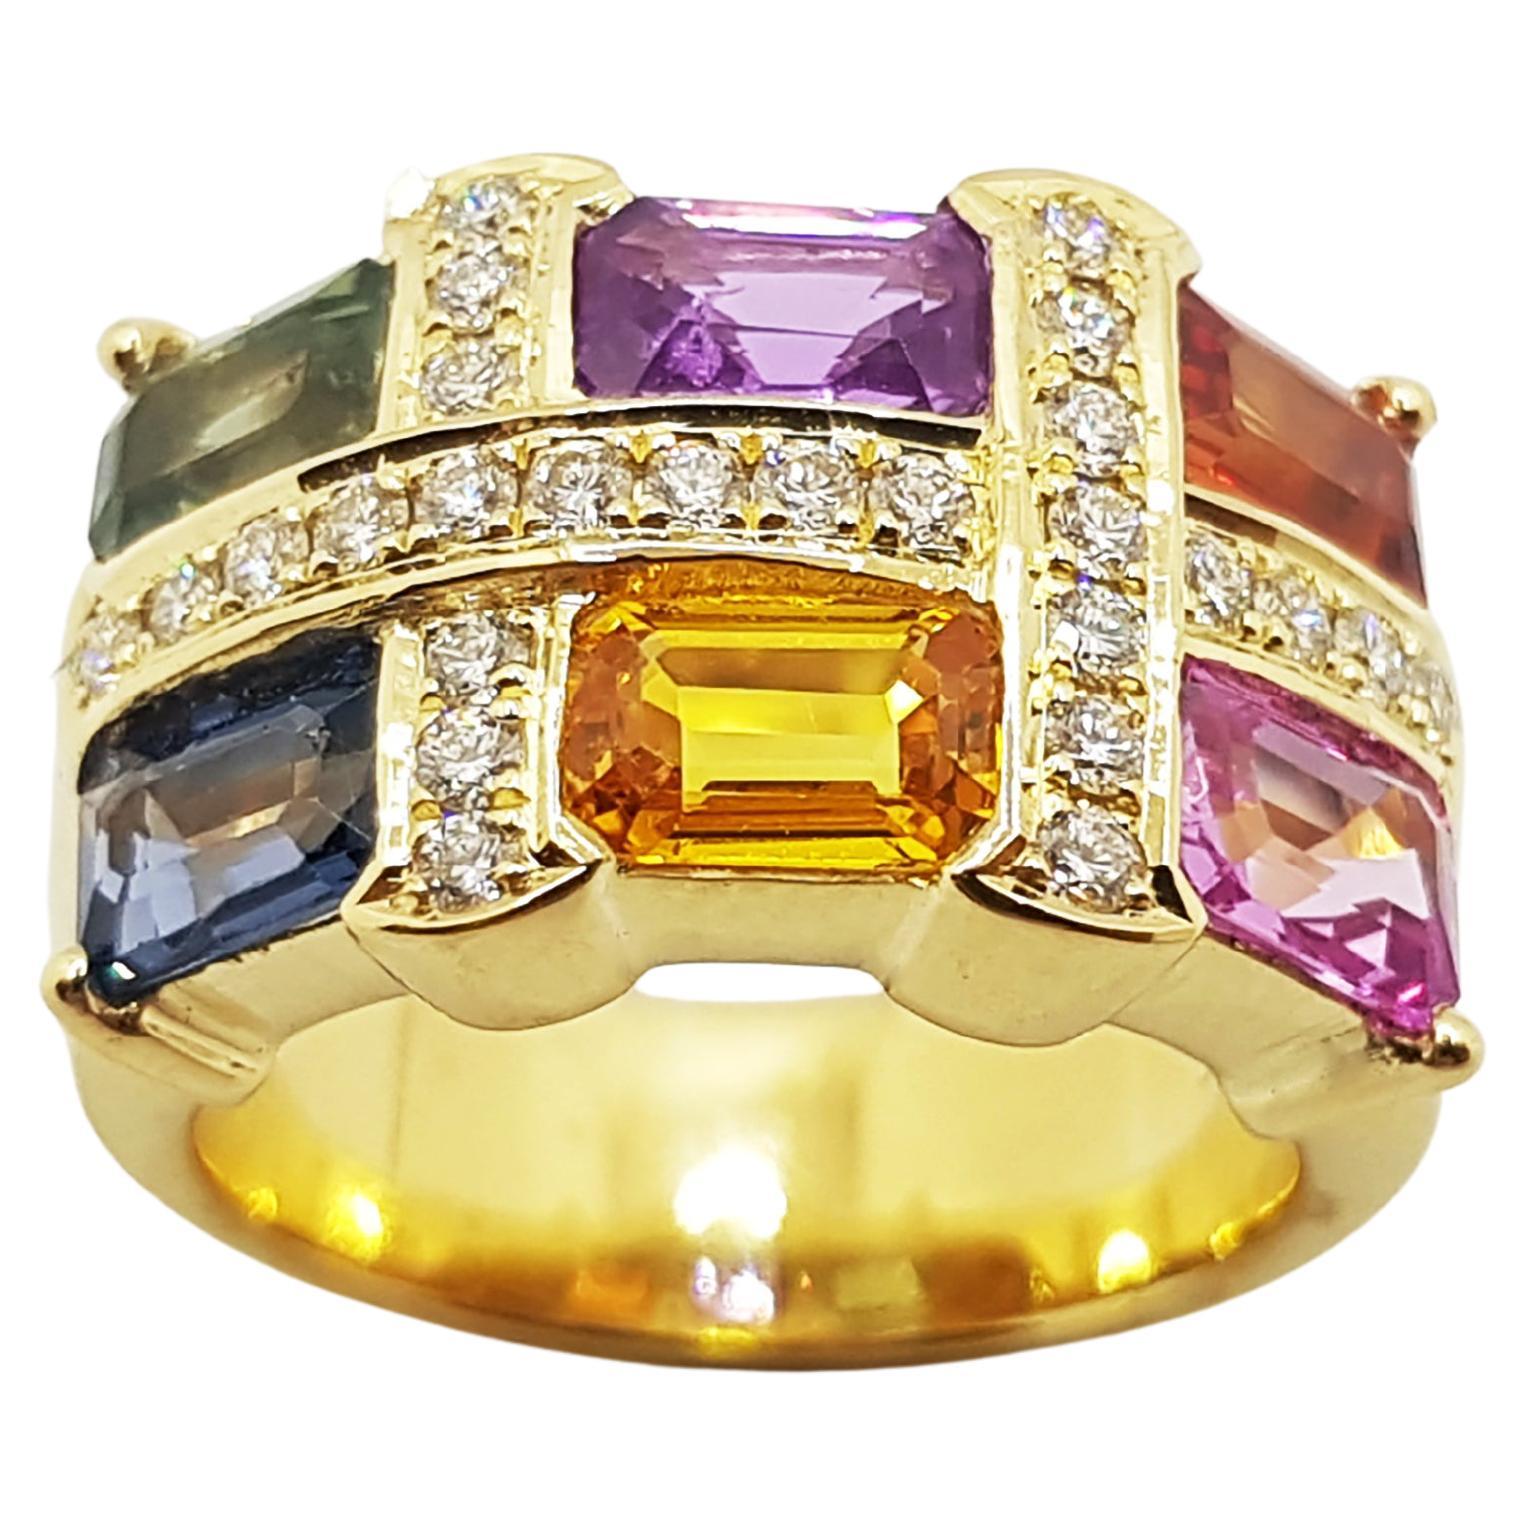 Rainbow Color Sapphire with Diamond Ring Set in 18 Karat Gold Settings For Sale